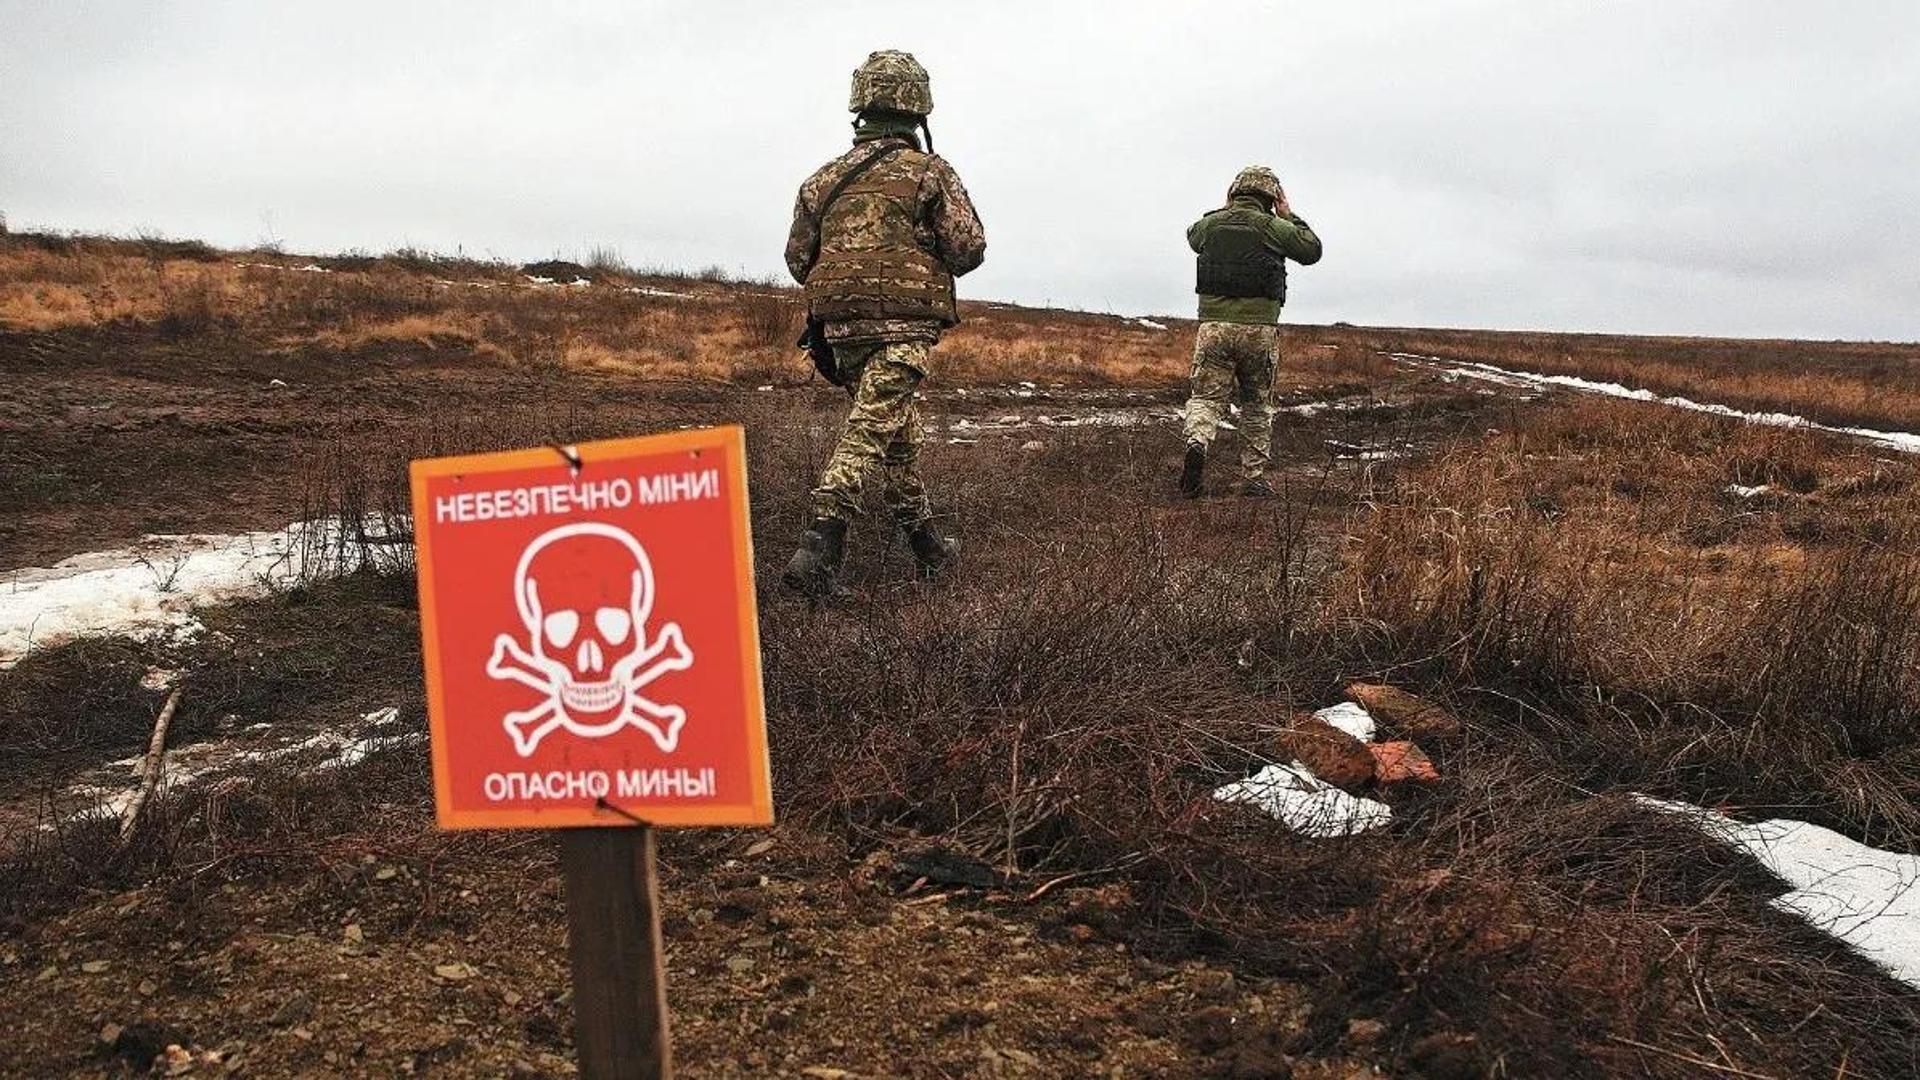 A thousand kilometers of mines separate Russians and Ukrainians